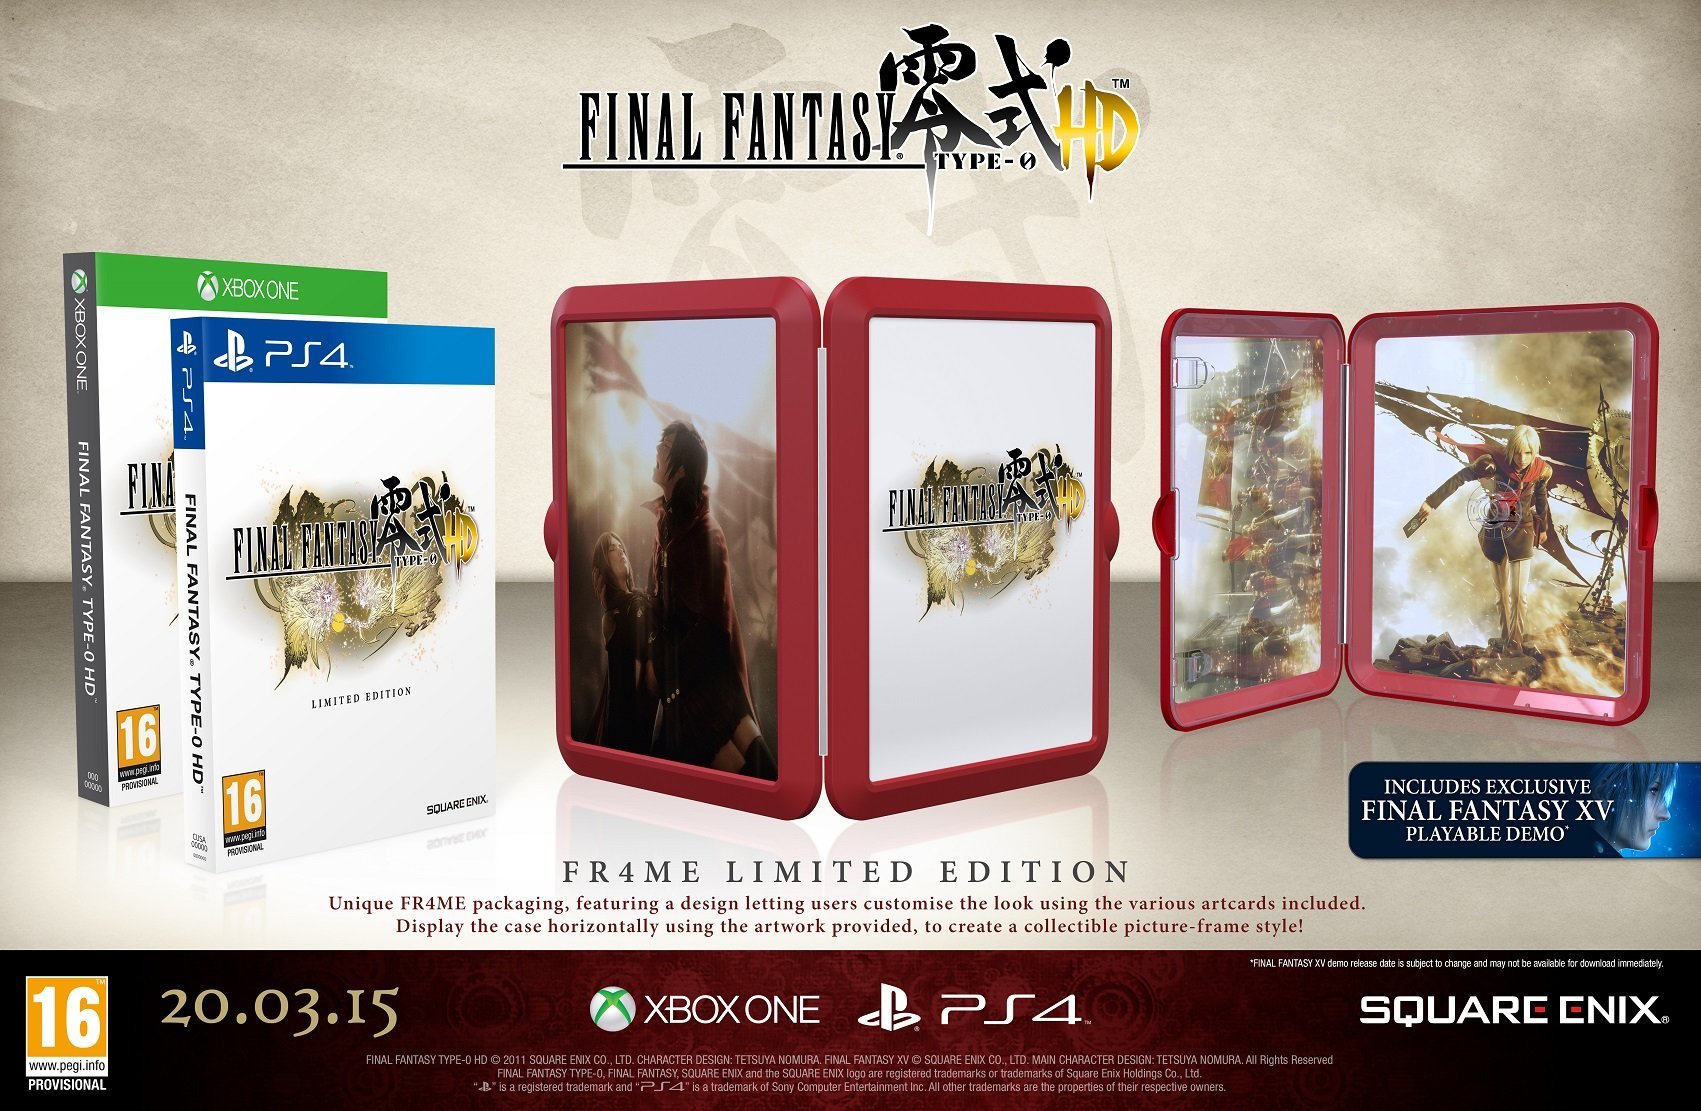 Final-Fantasy-Type-0-fr4me-limited-edition 110115